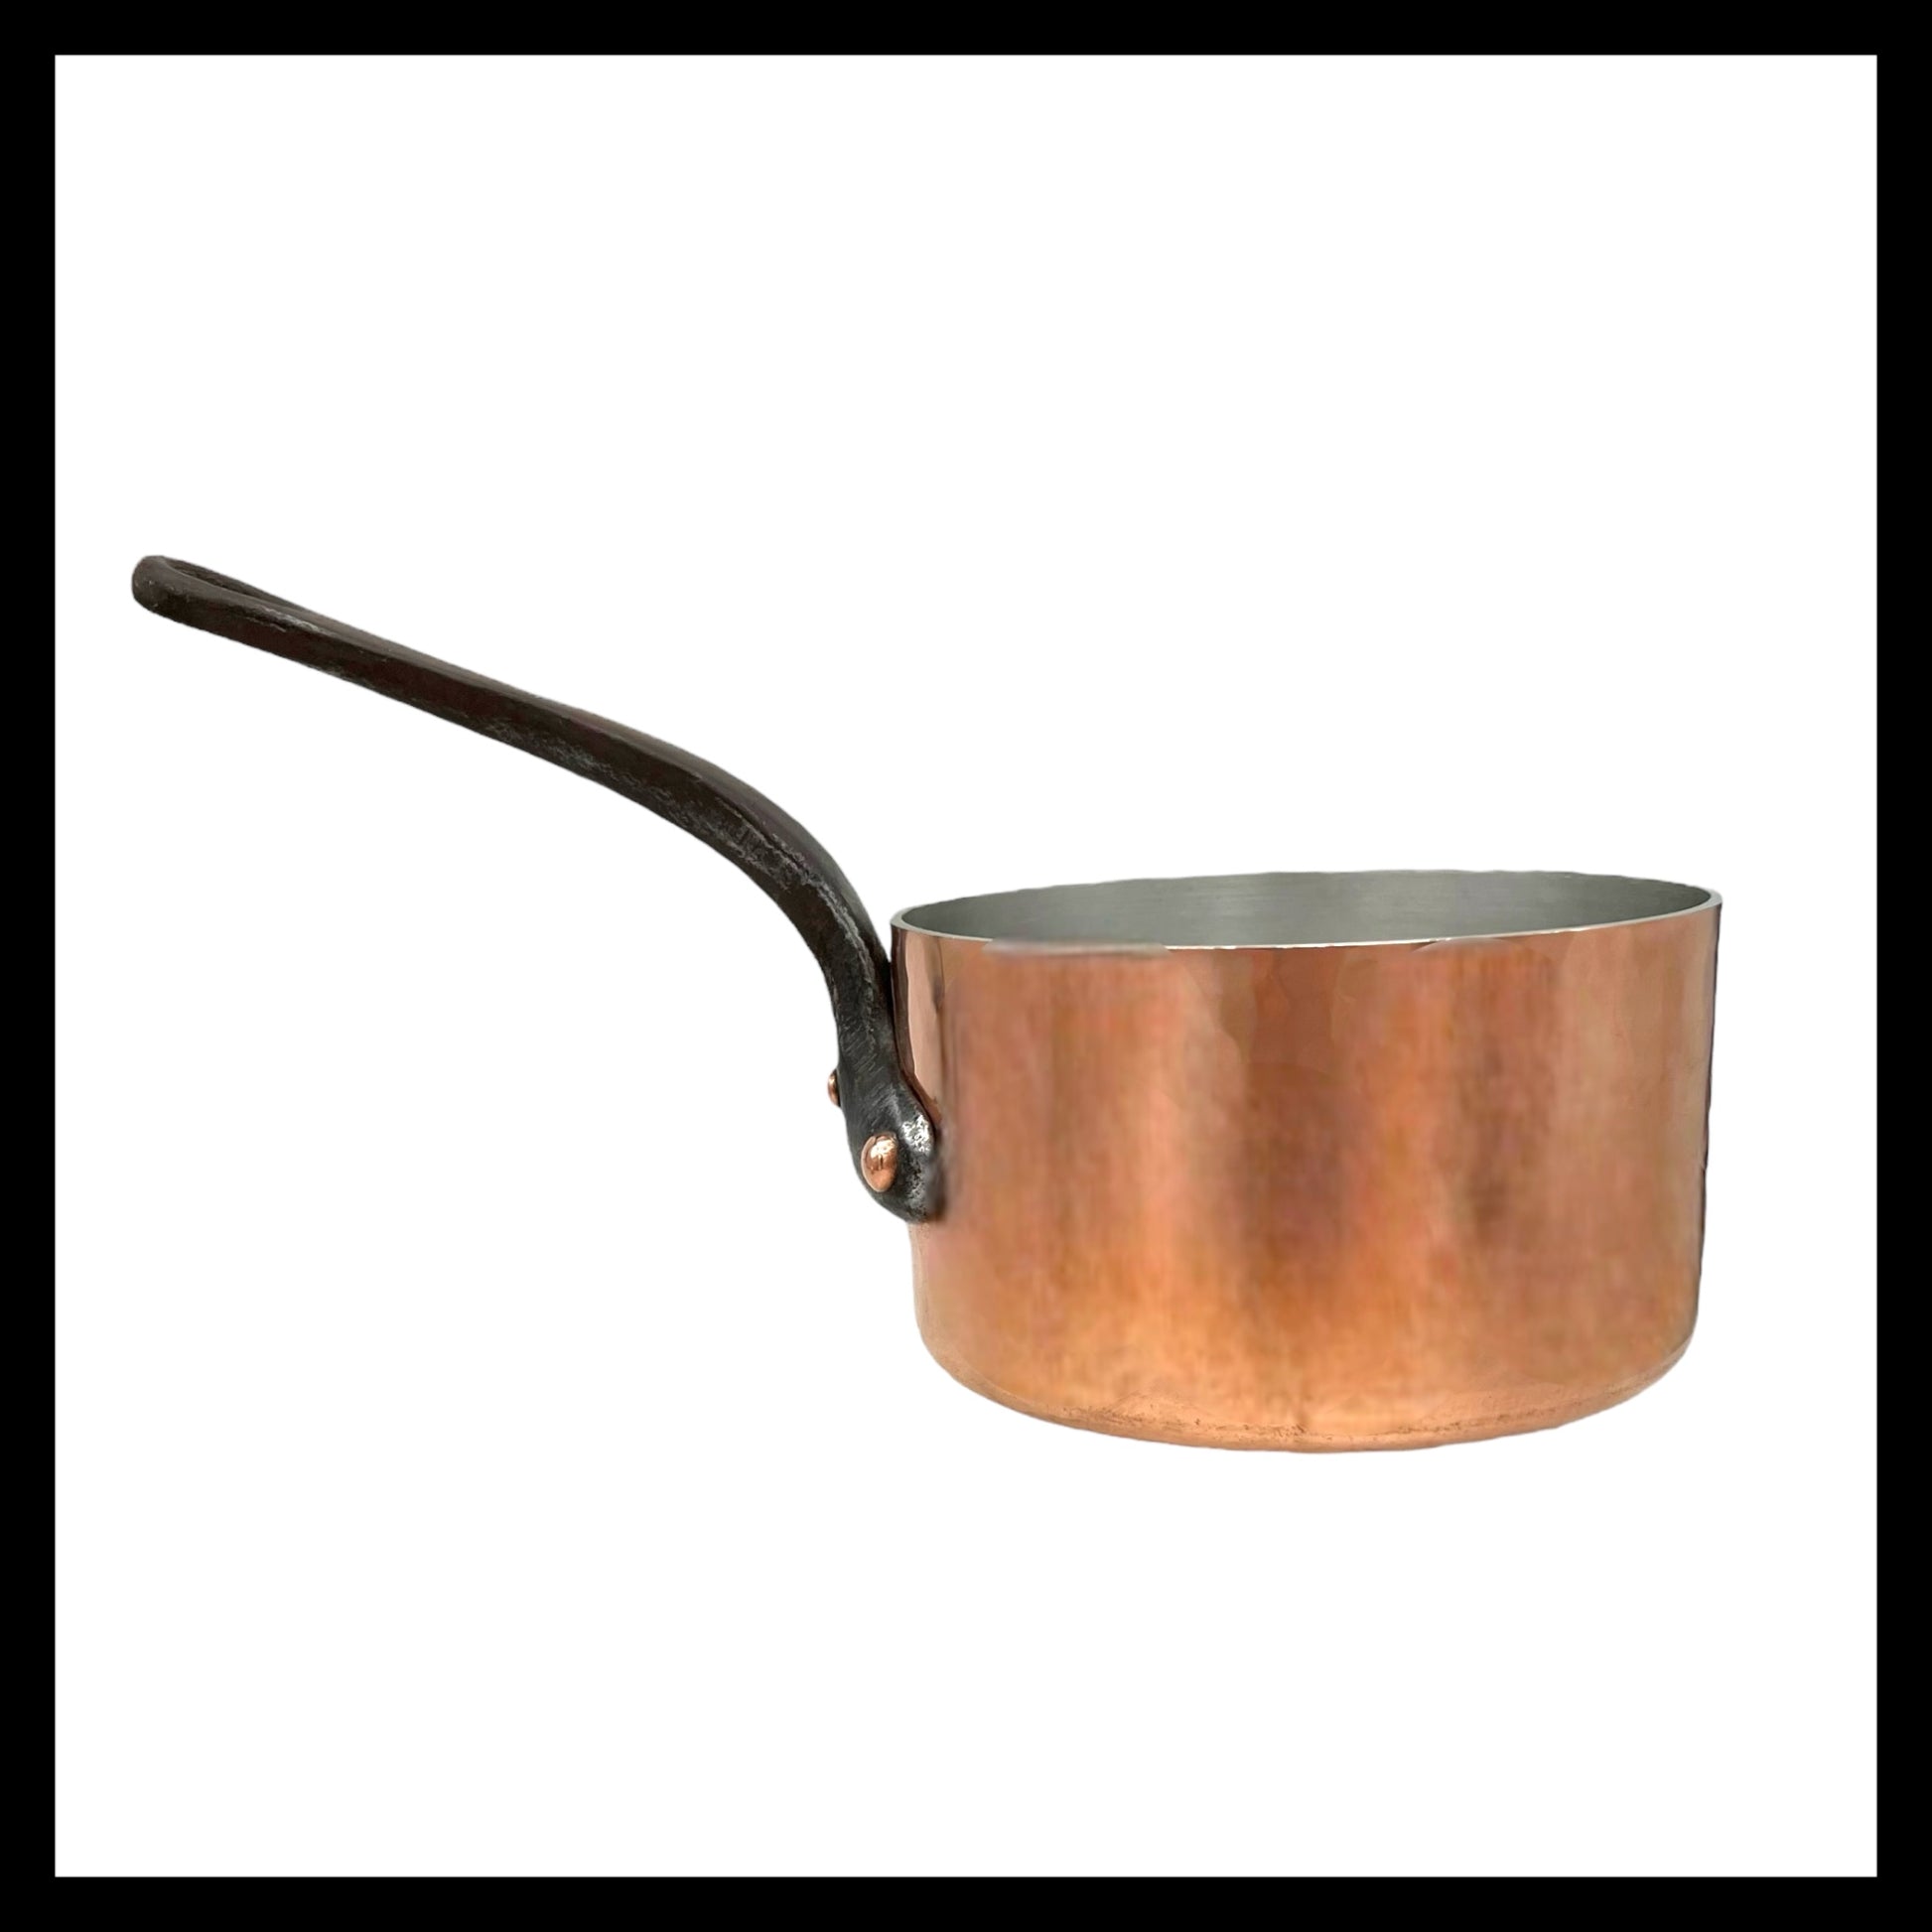 French 3mm copper saucepan refurbished with brand new tin lining for sale from All Things French Store